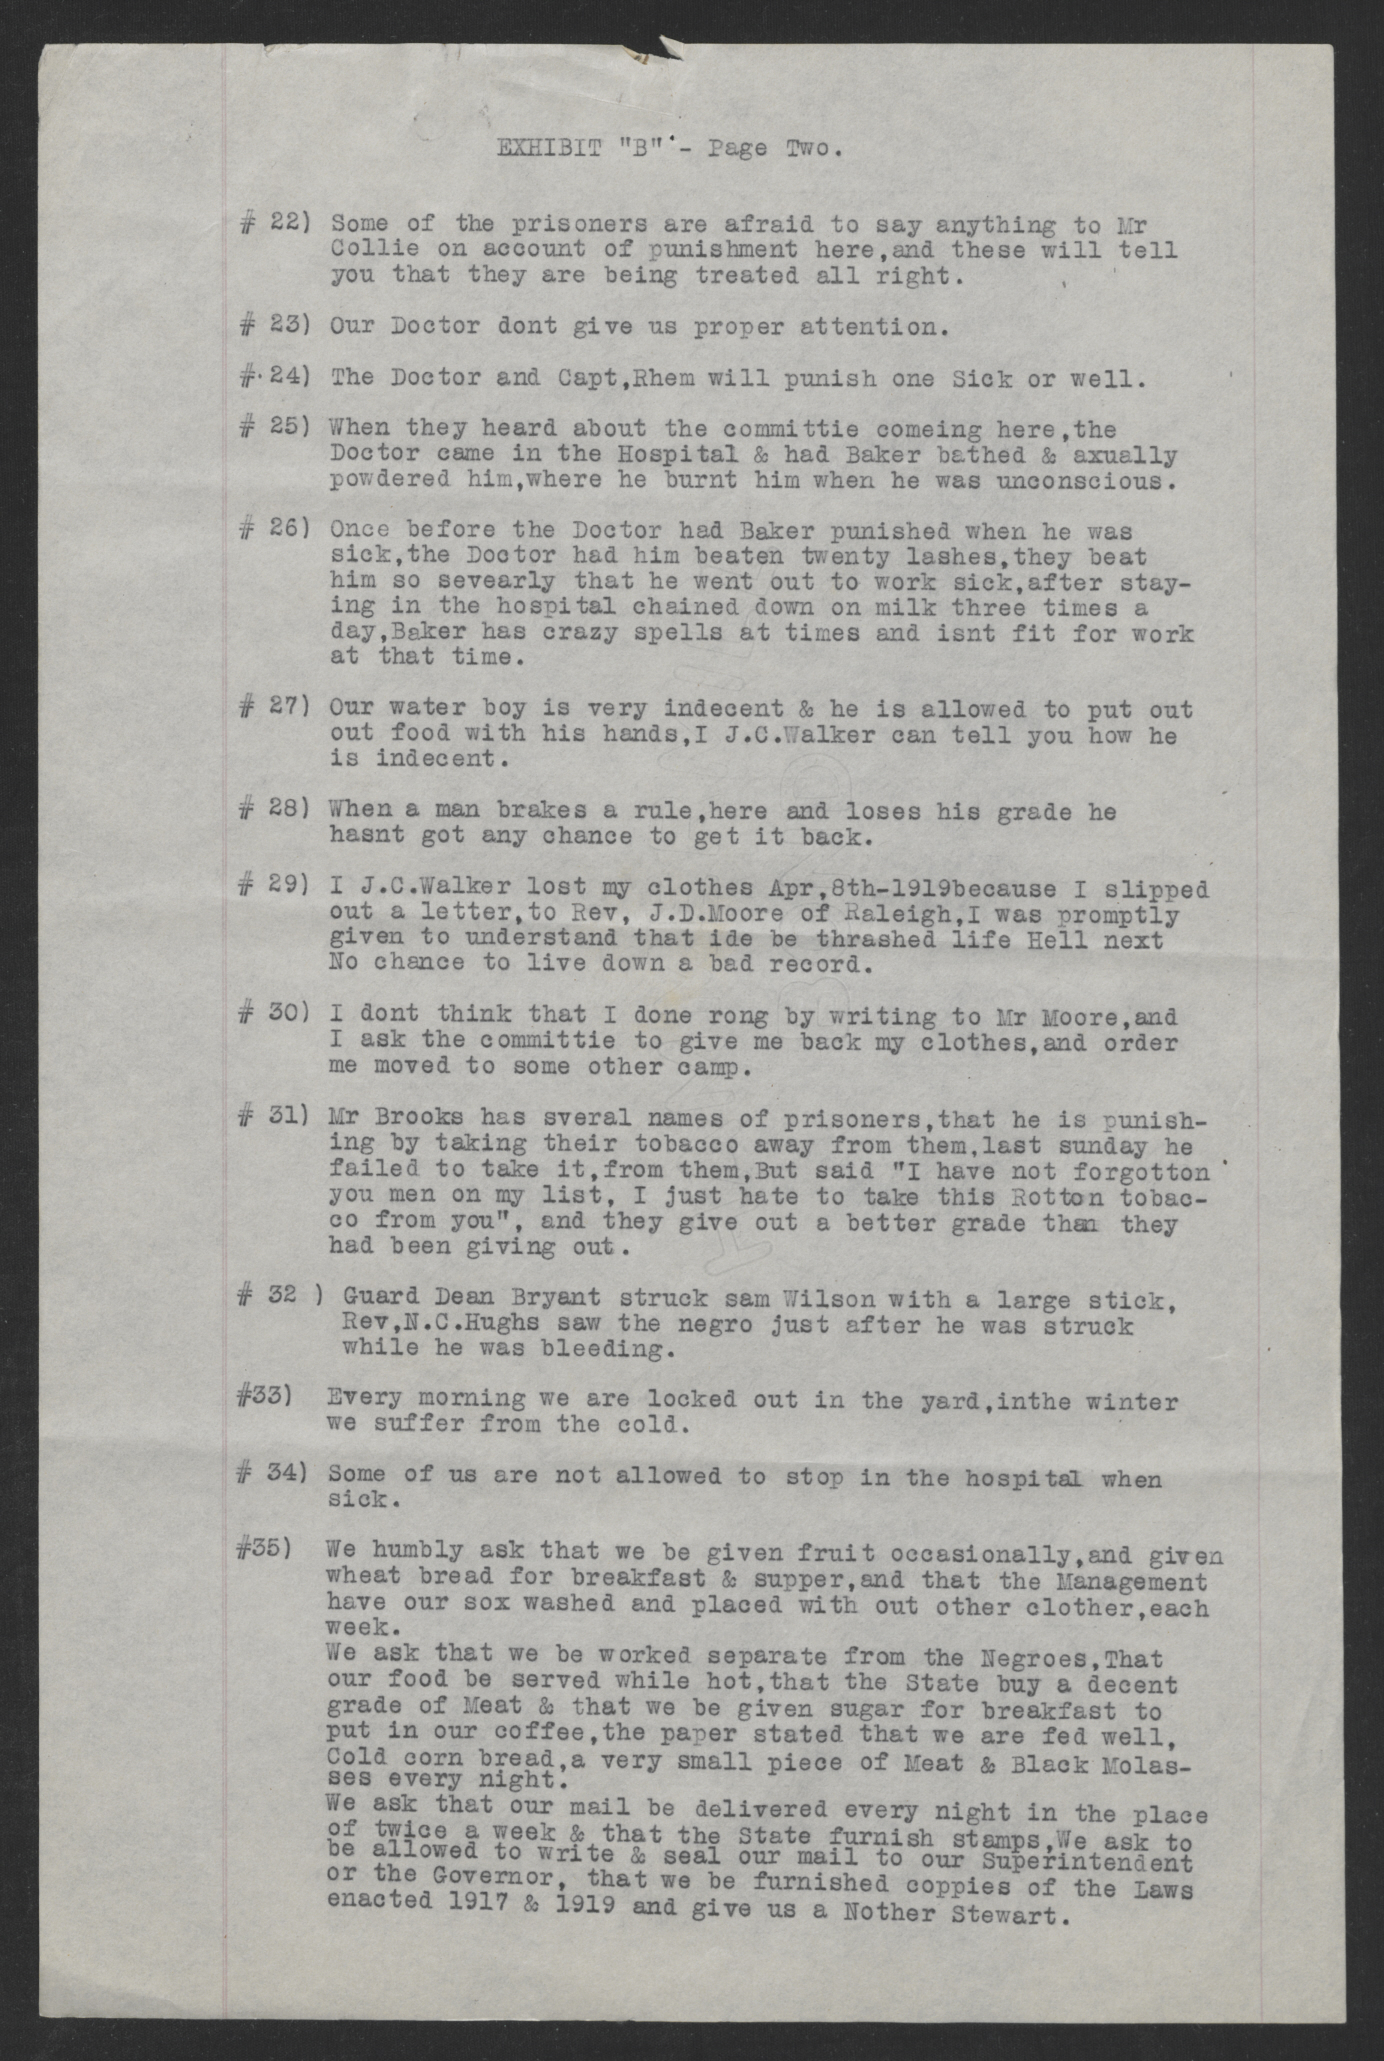 Exhibit B in the Investigation of the Charges Made by Inmates of the State Prison Farm to Earl E. Dudding, 12 May 1919, page 2